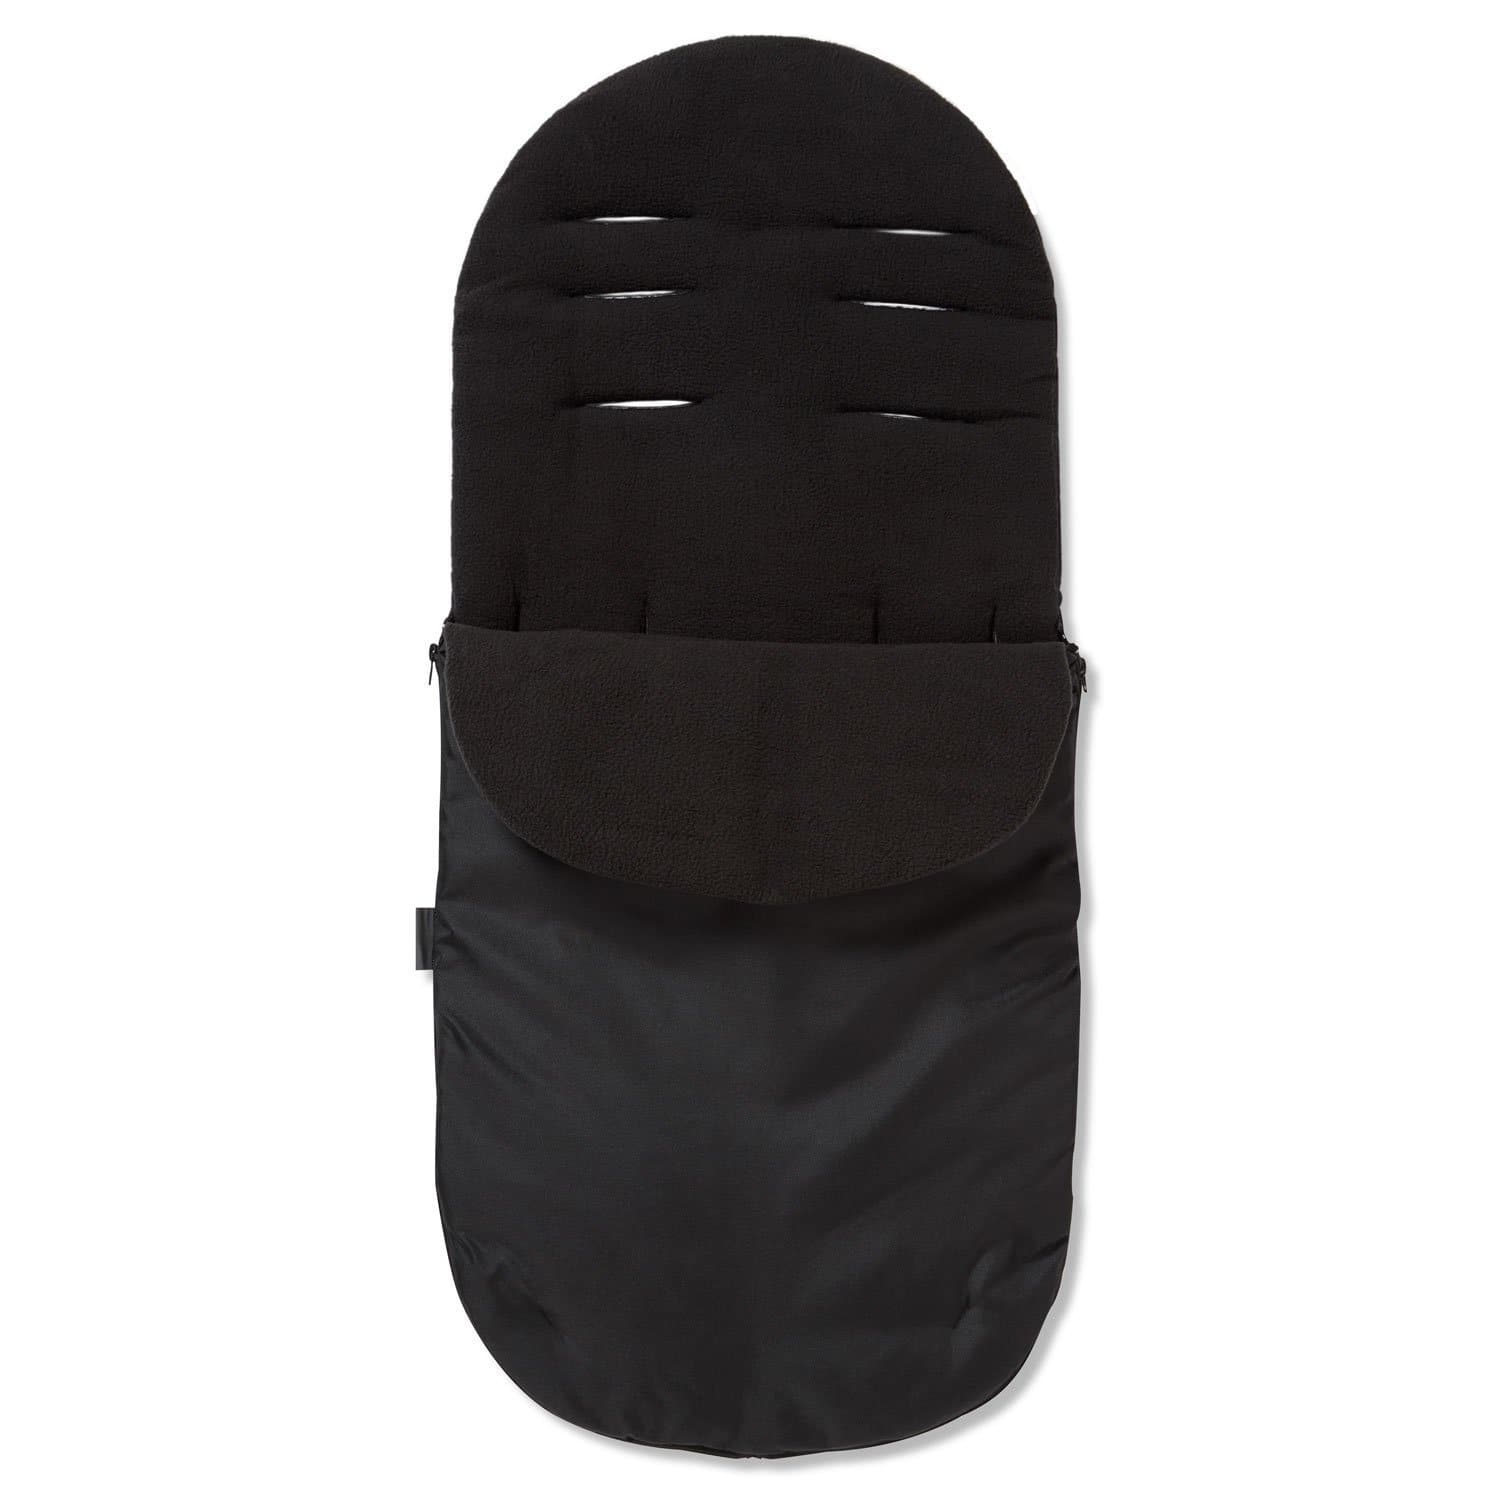 Footmuff / Cosy Toes Compatible with NeoNato - Black / Fits All Models | For Your Little One